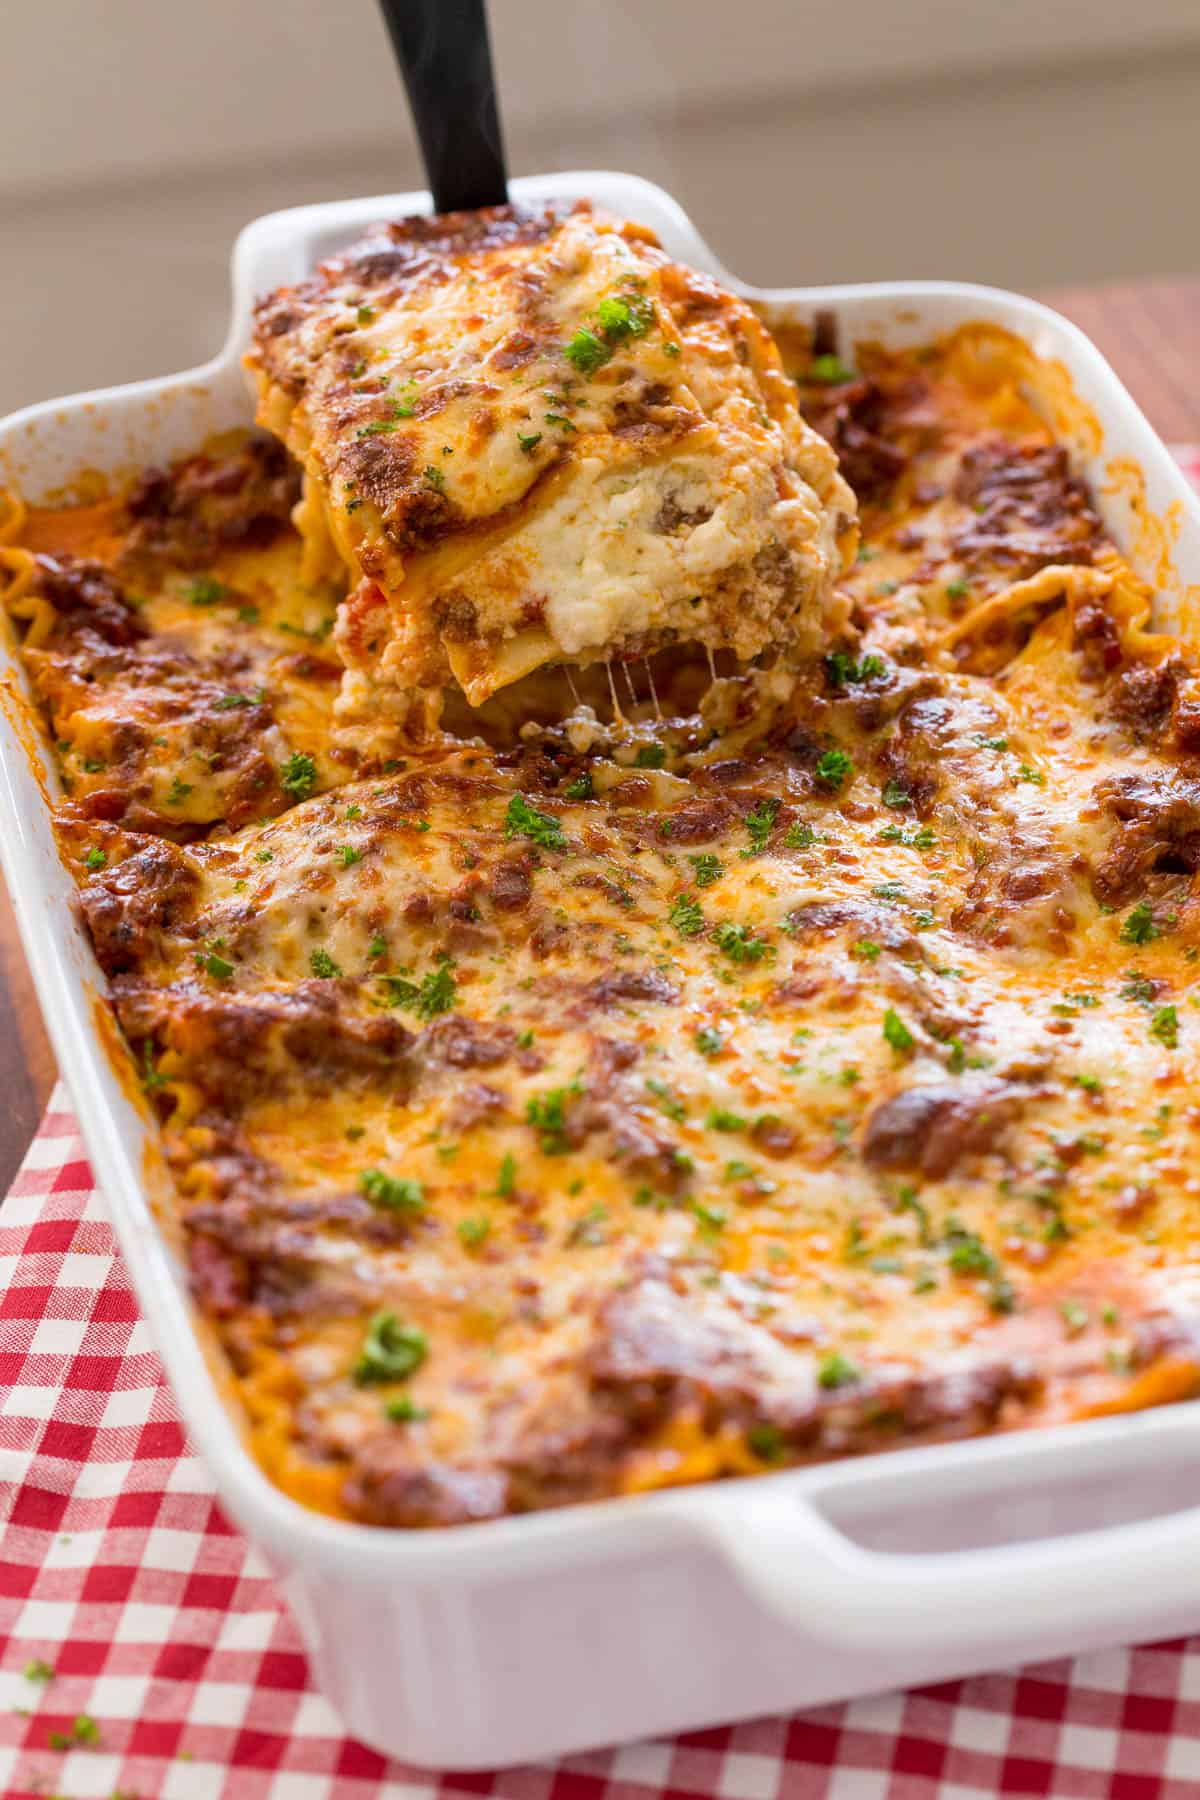 Piece of lasagna being lifted from baking dish